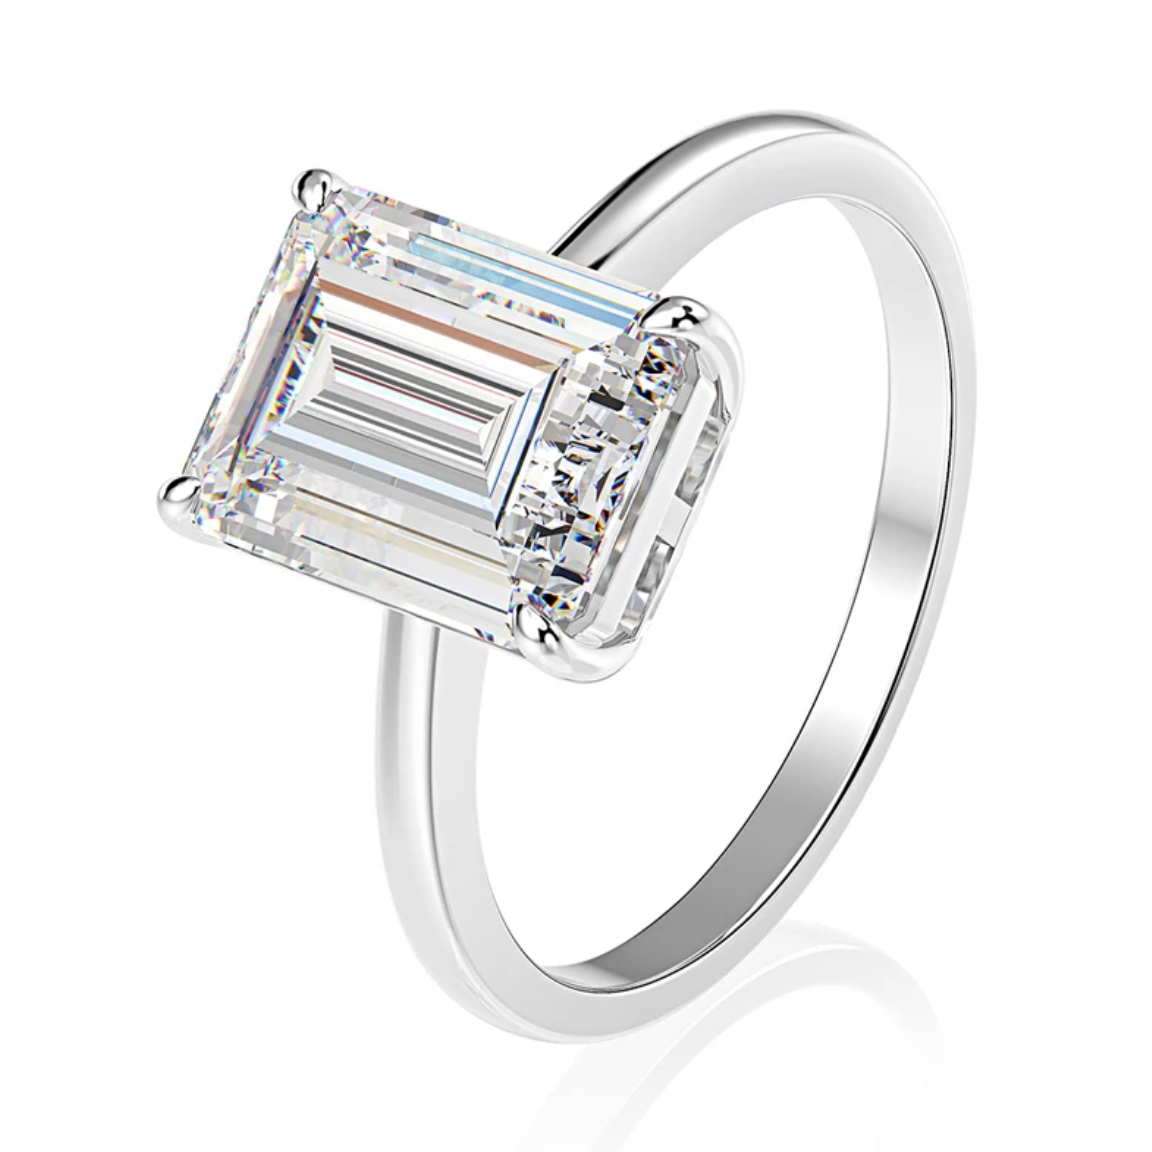 Sofia Richie Grainge Engagement Ring Dupe 6 ct Emerald Cut Diamond Engagement Ring on Sterling Silver band by Margalit Rings